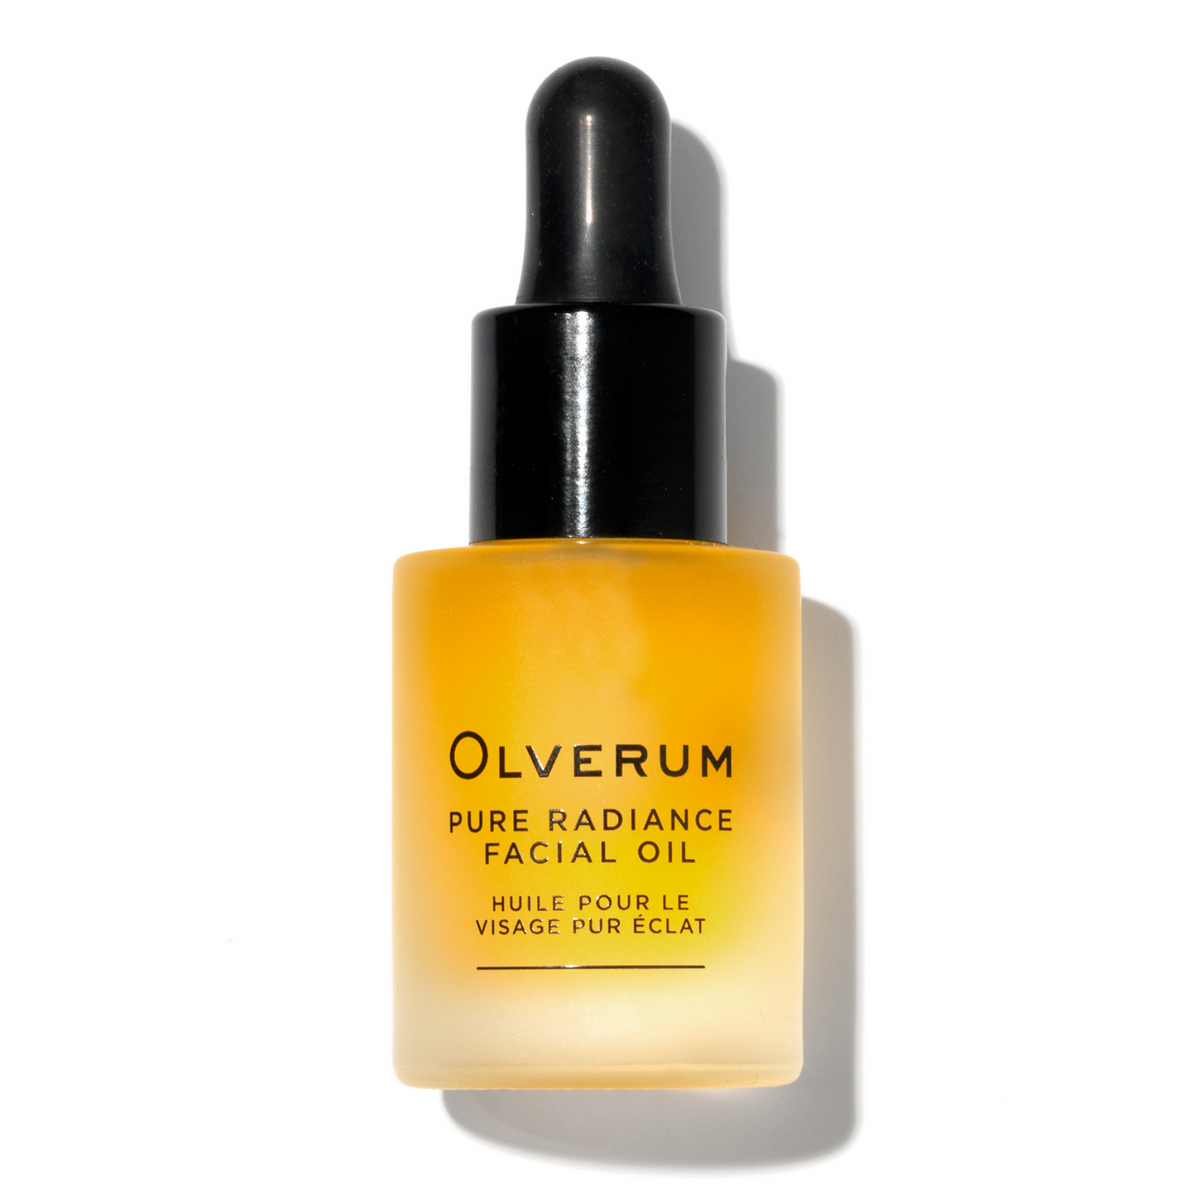 Primary Image of Pure Radiance Facial Oil